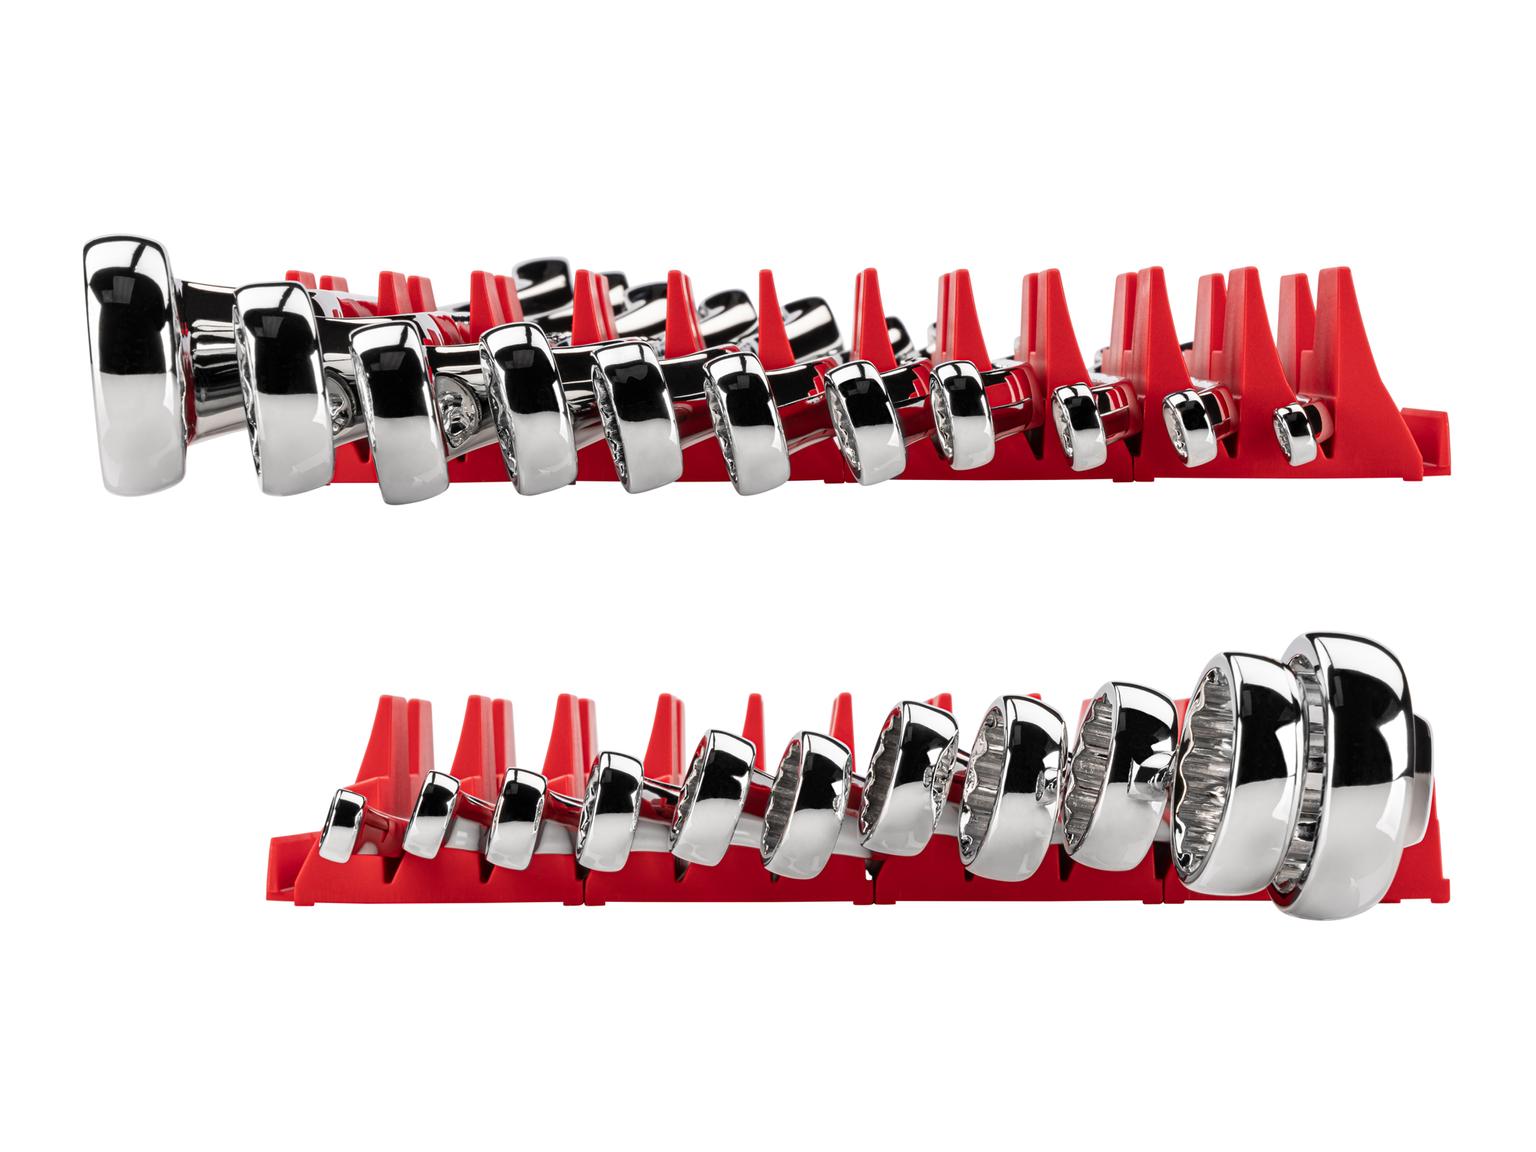 TEKTON WBE95202-T 45-Degree Offset Box End Wrench Set with Modular Slotted Organizer, 11-Piece (6-32 mm)